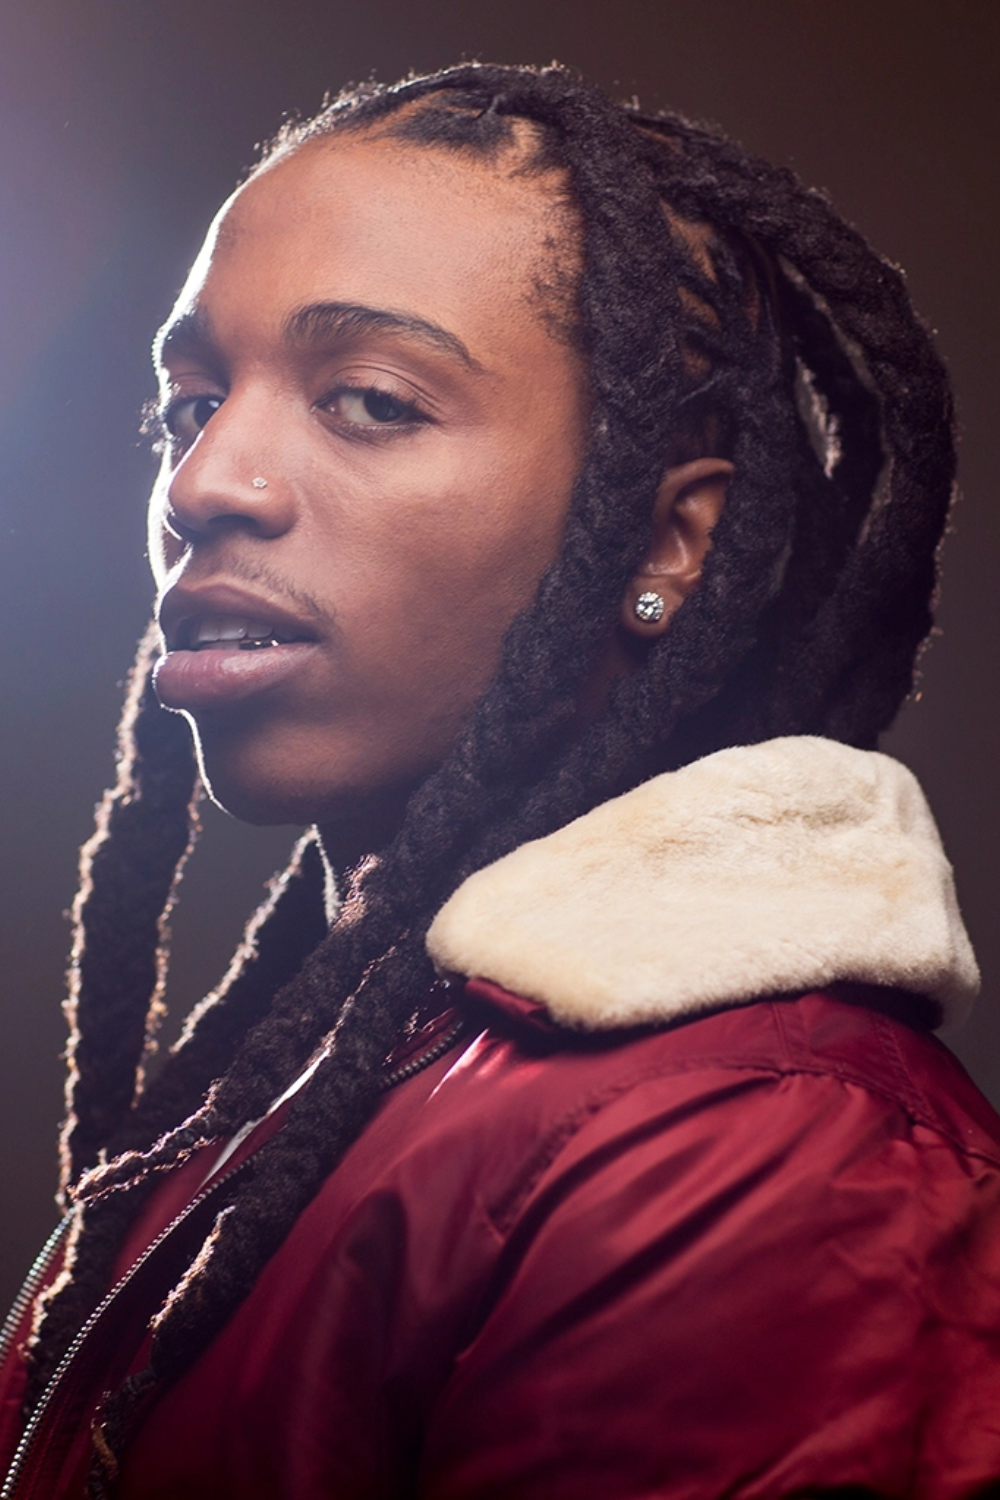 Jacquees Dreads in braids